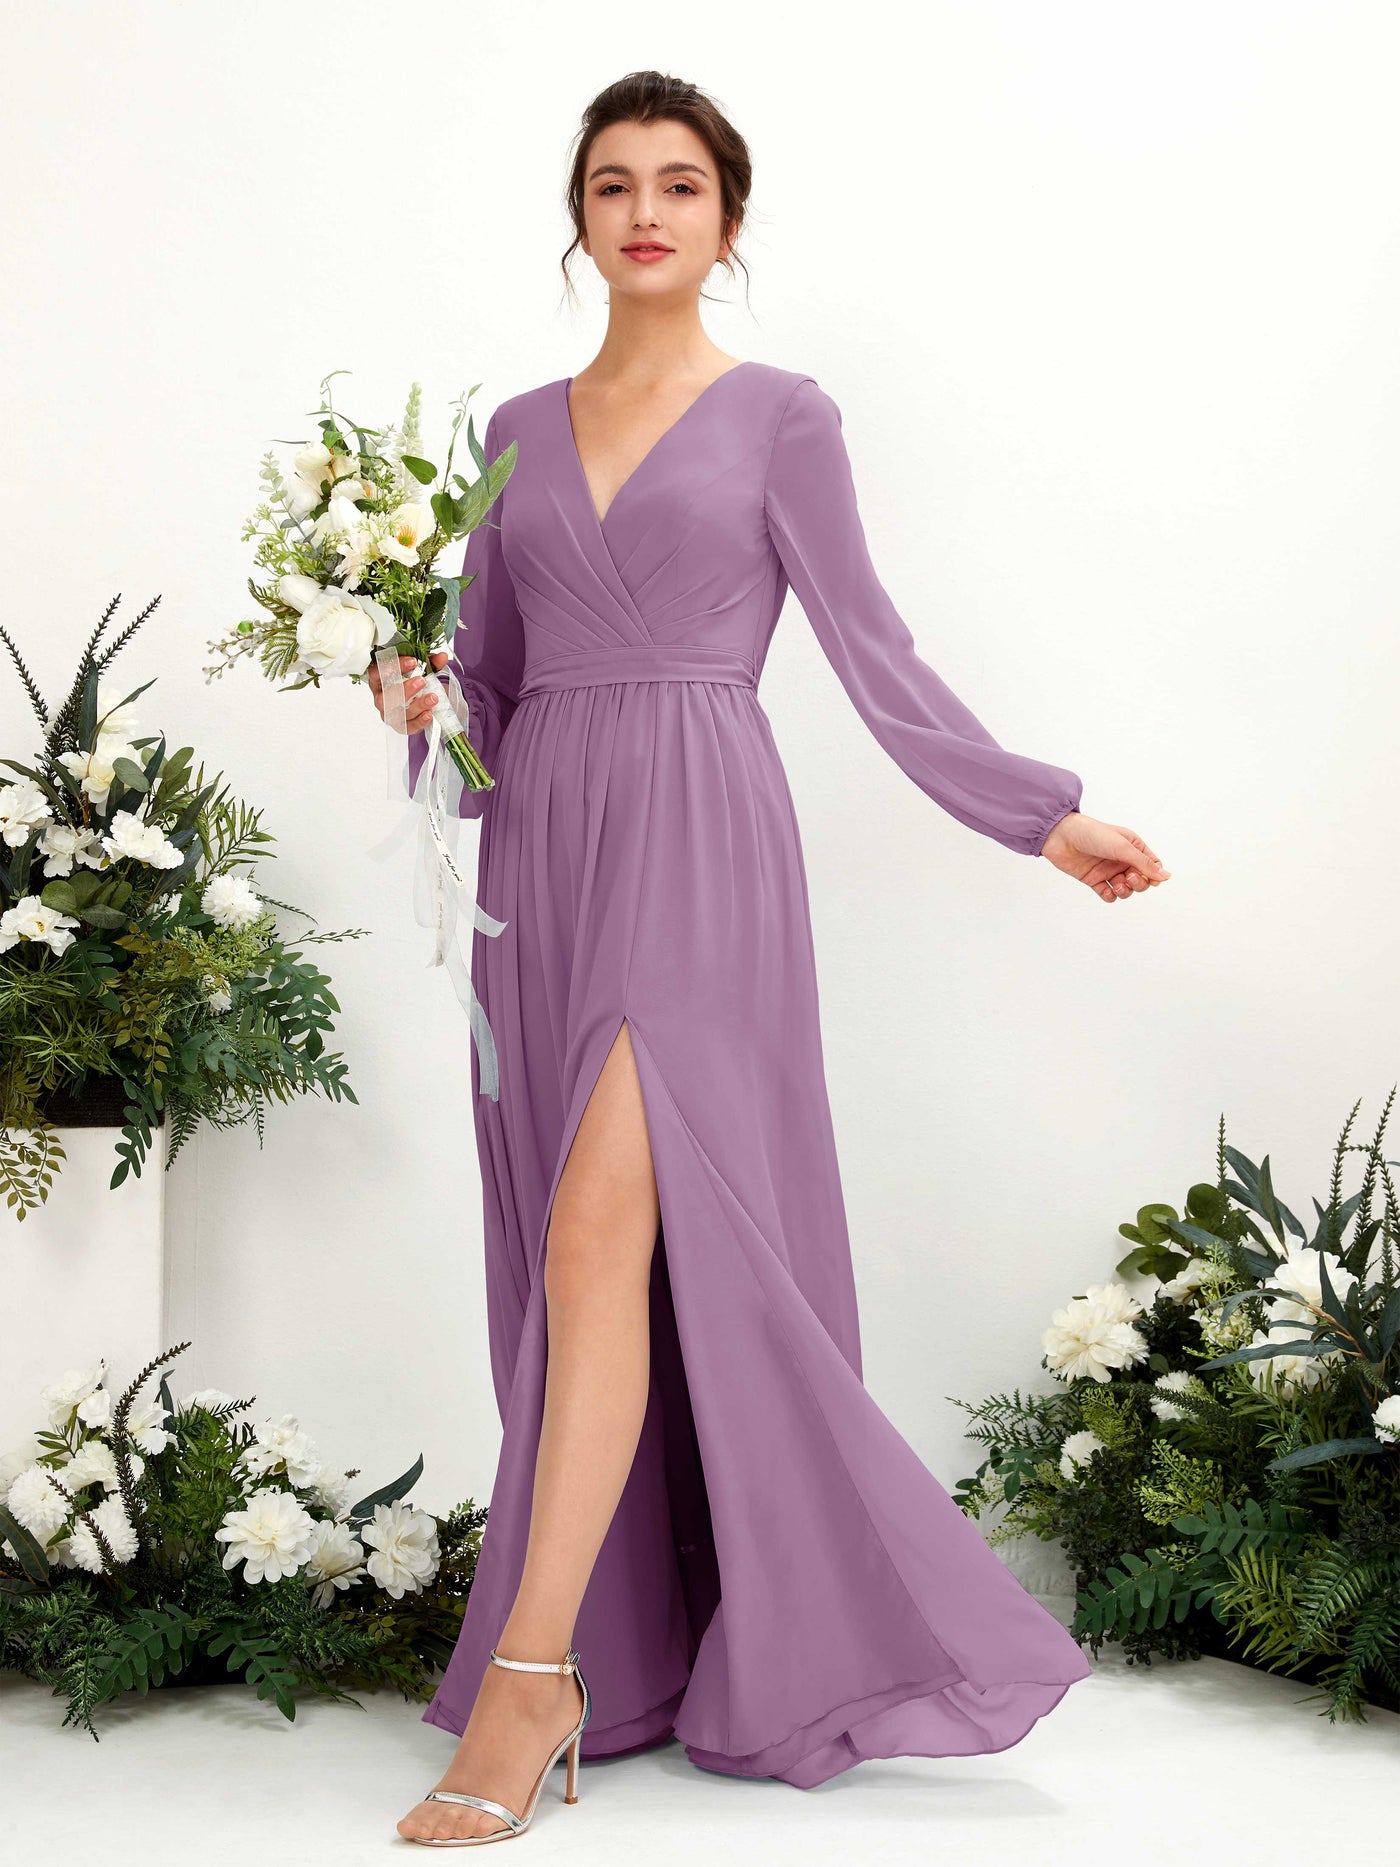 Orchid Mist Bridesmaid Dresses Bridesmaid Dress A-line Chiffon V-neck Full Length Long Sleeves Wedding Party Dress (81223821)#color_orchid-mist